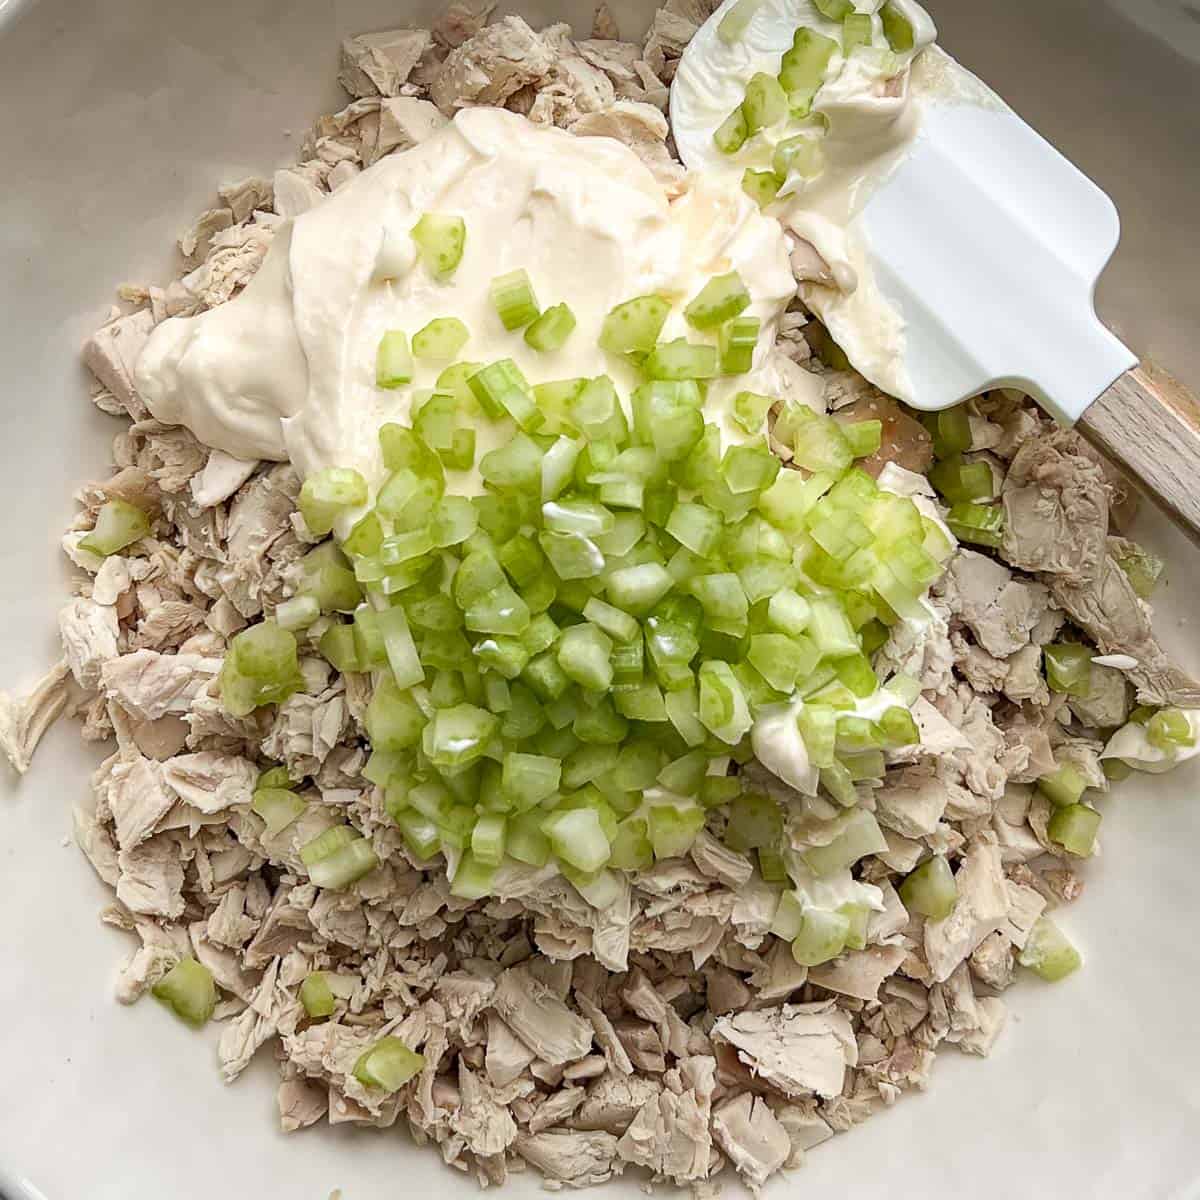 Diced celery added on top of mayo and cut up rotisserie chicken.